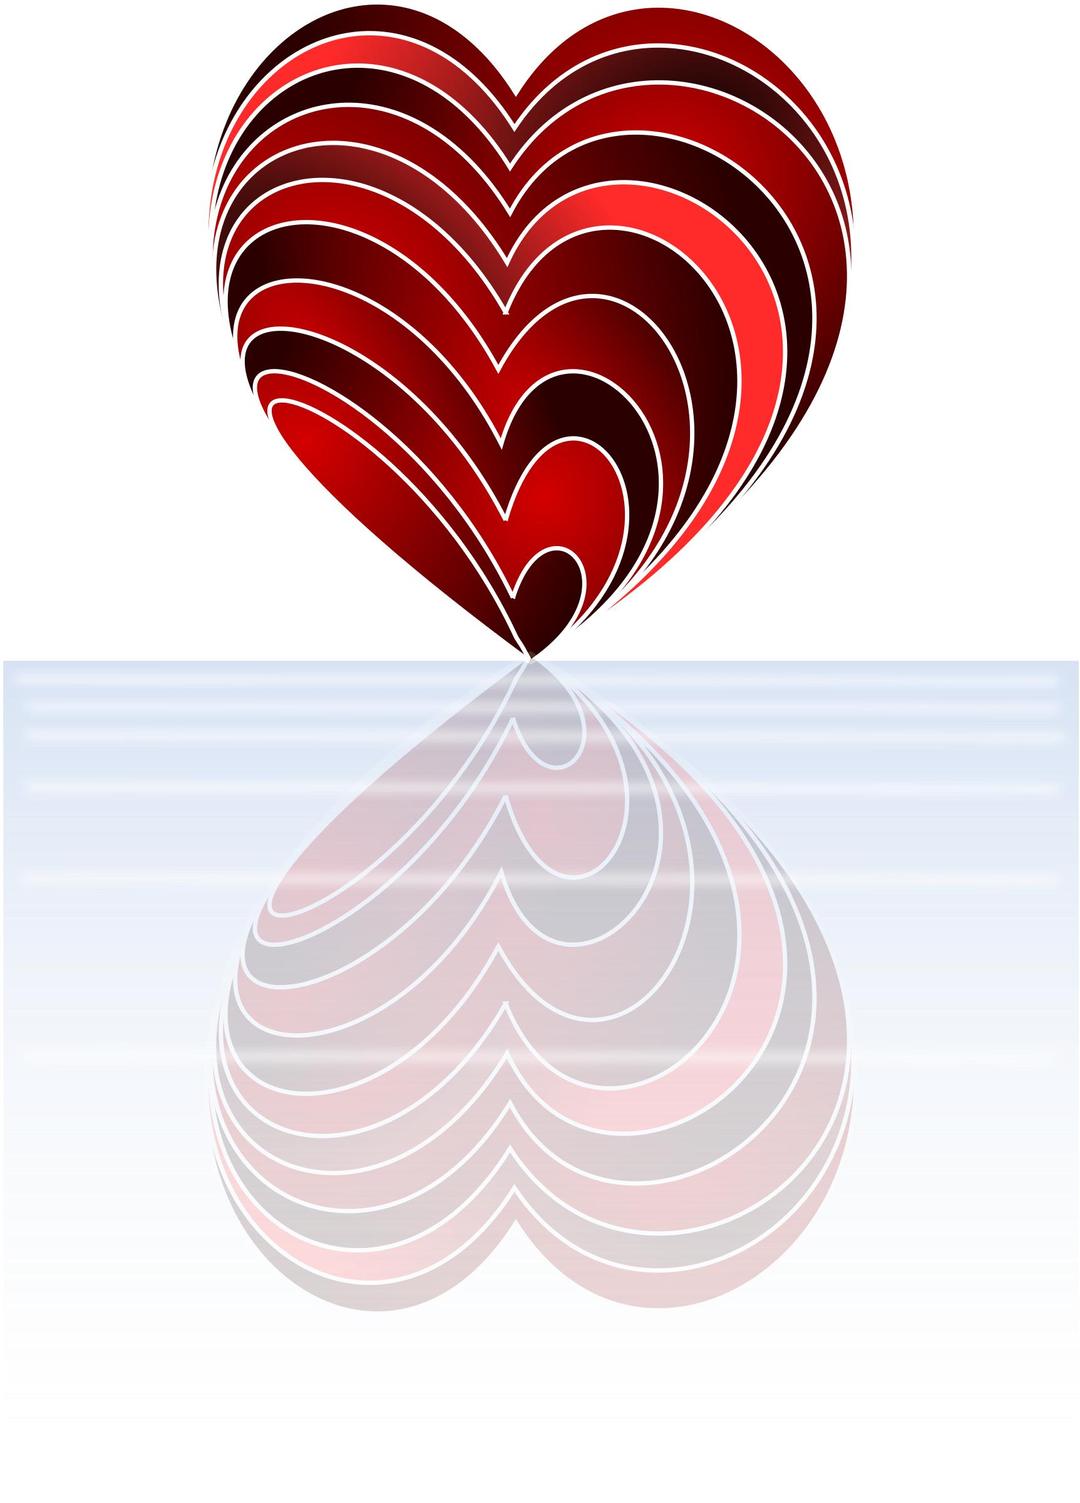 Layer heart png transparent